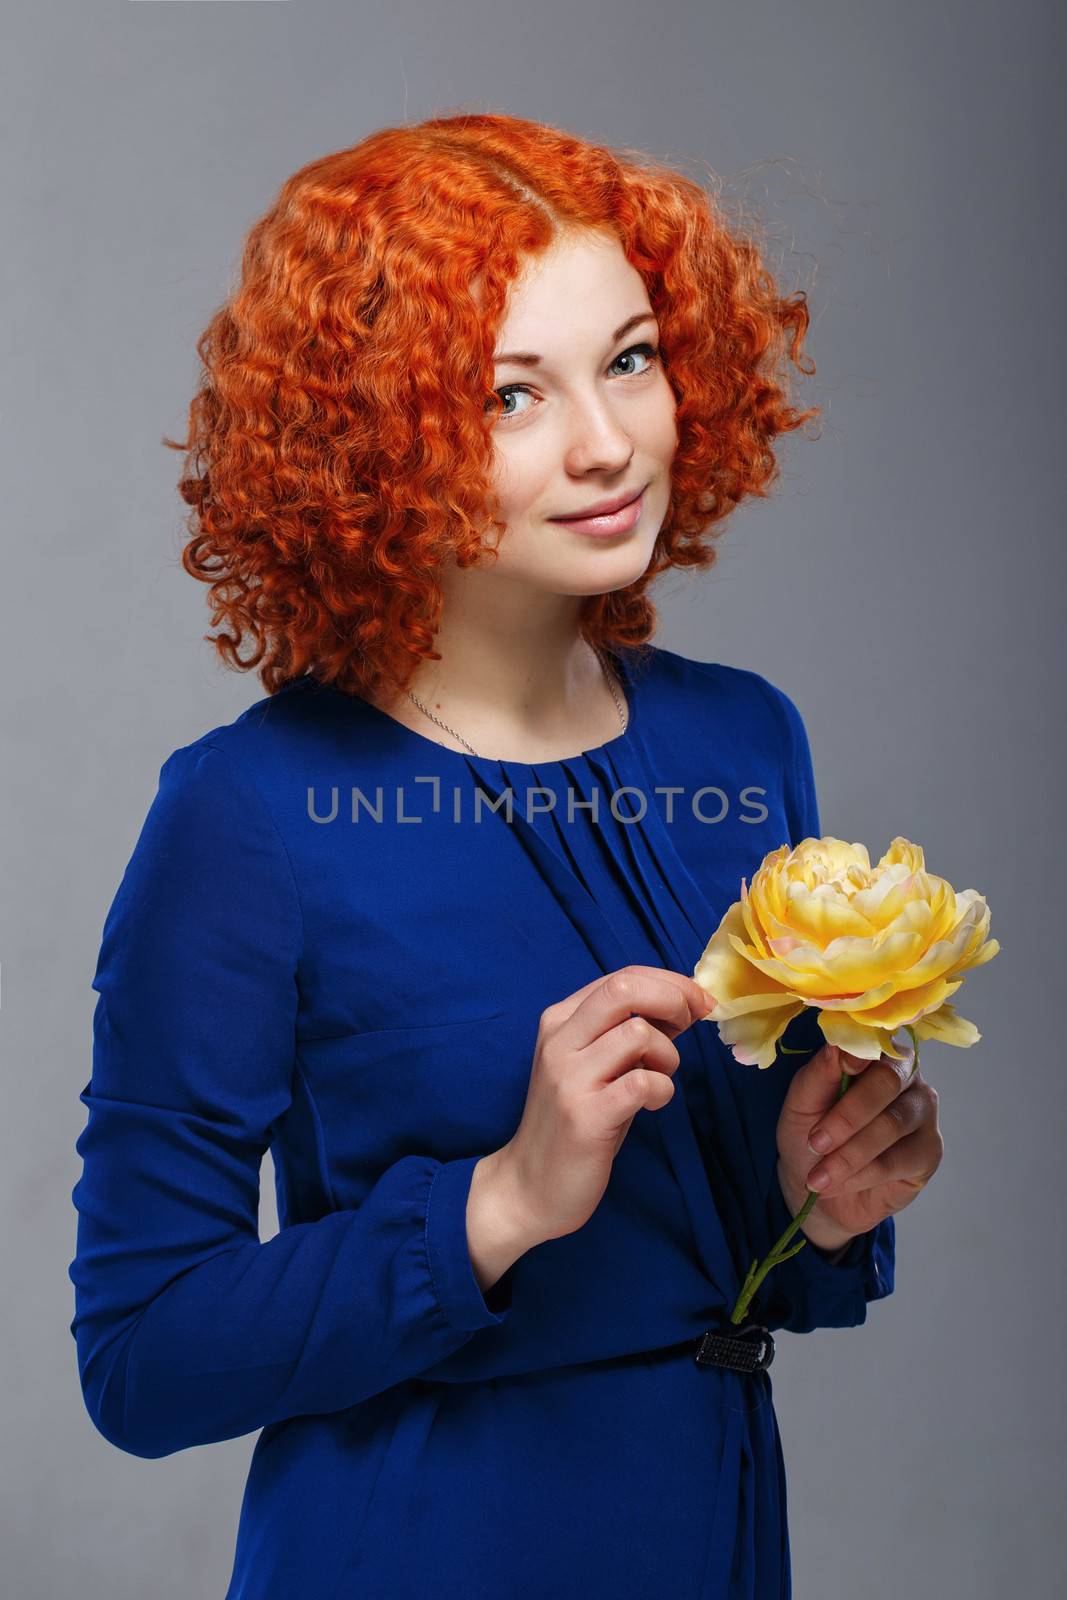 Red-haired girl and flowers by Vagengeym